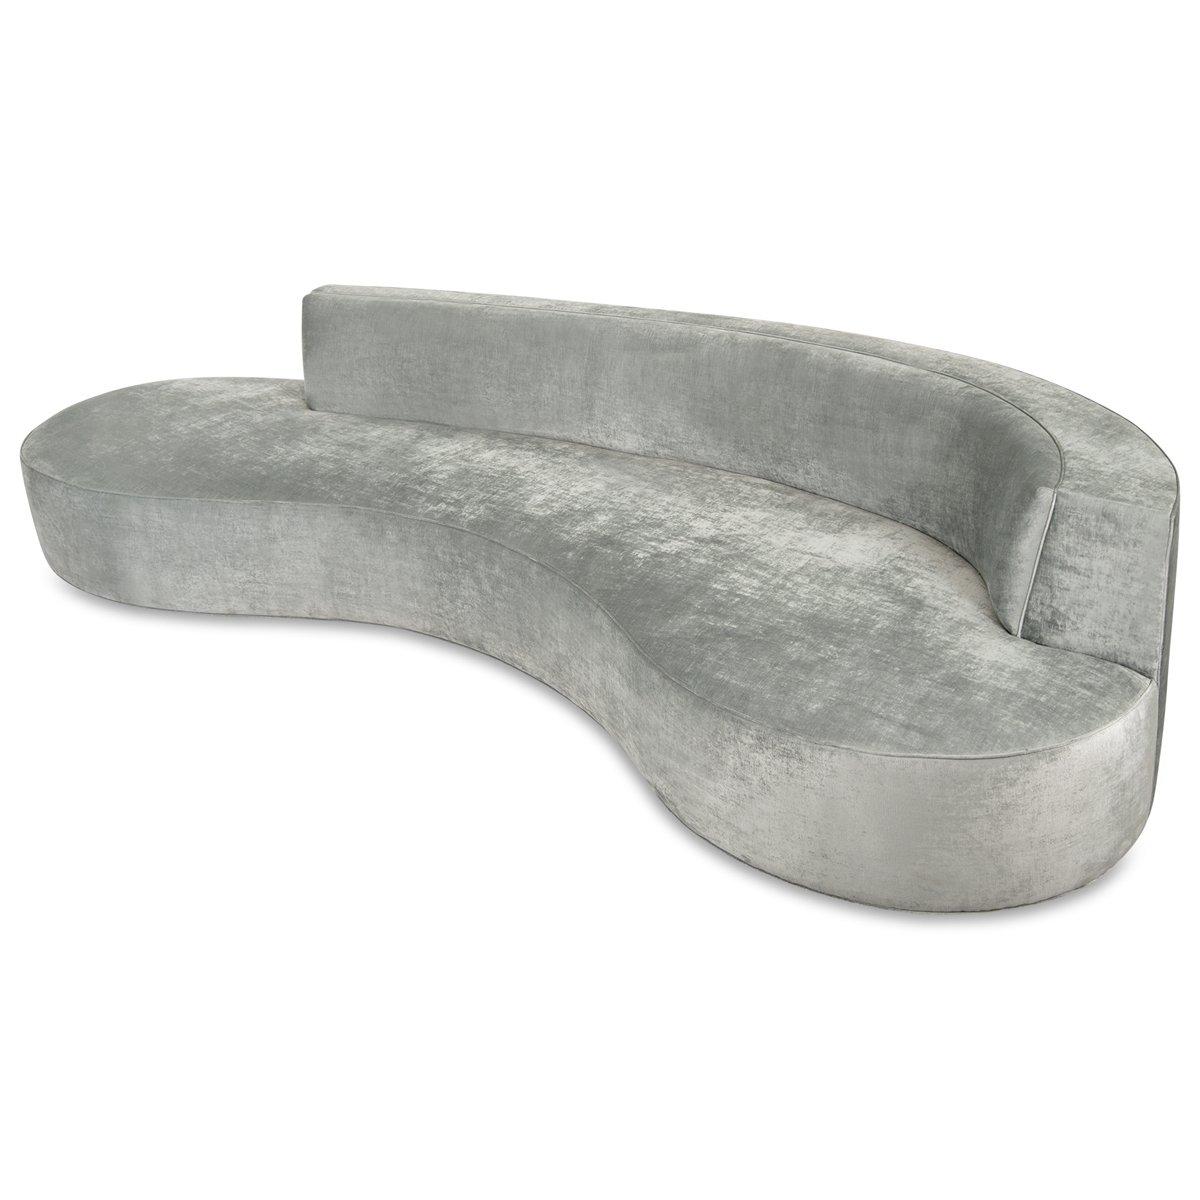 Sleep and clean lines define this extra large chaise sofa. With a kidney bean shape, it is upholstered in a lustrous silver velvet and is sure to stand out in any large space.